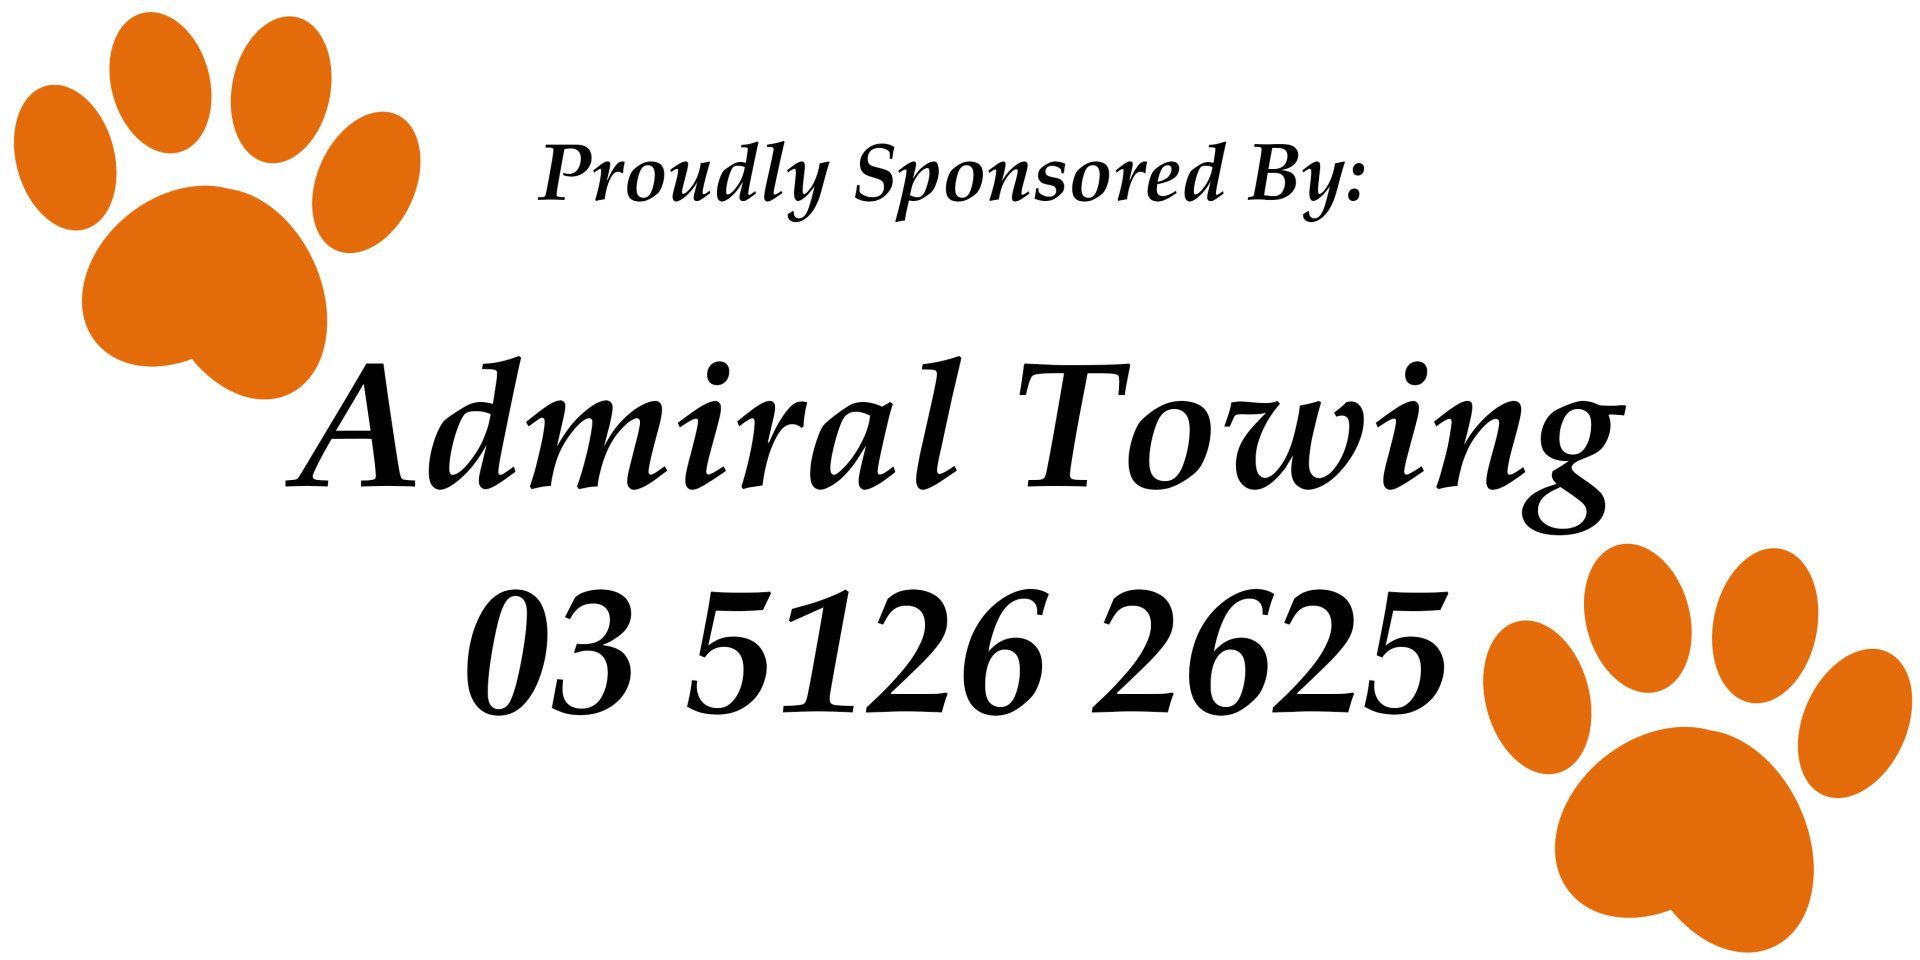 Admiral Towing